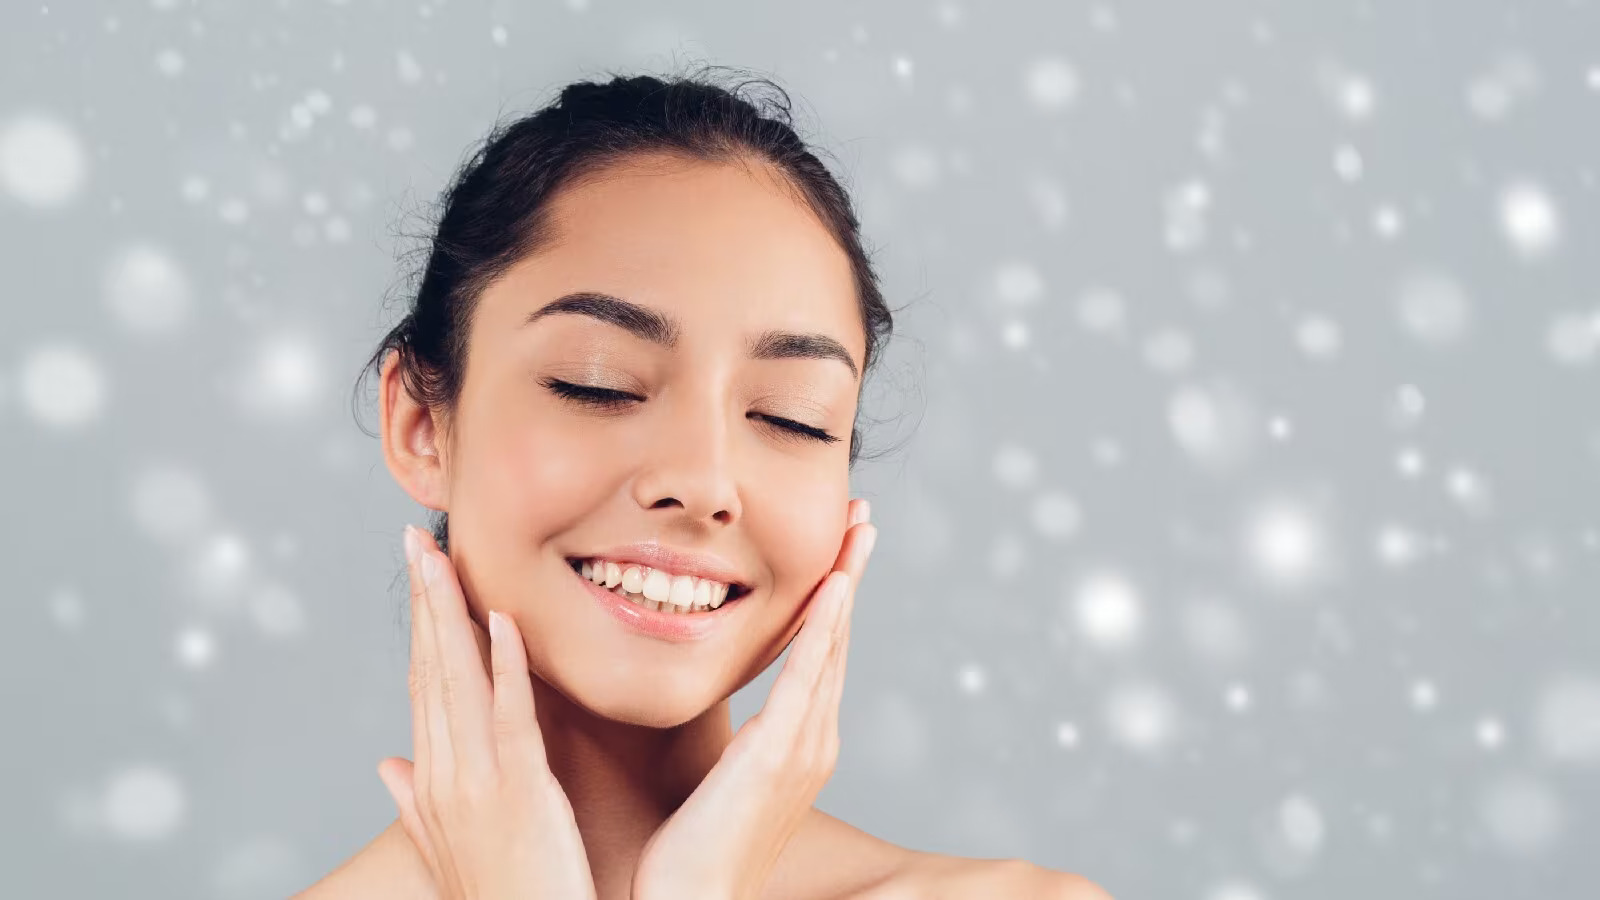 Winter Skin Care Tips Home Remedies To Keep Your Skin Moisturised